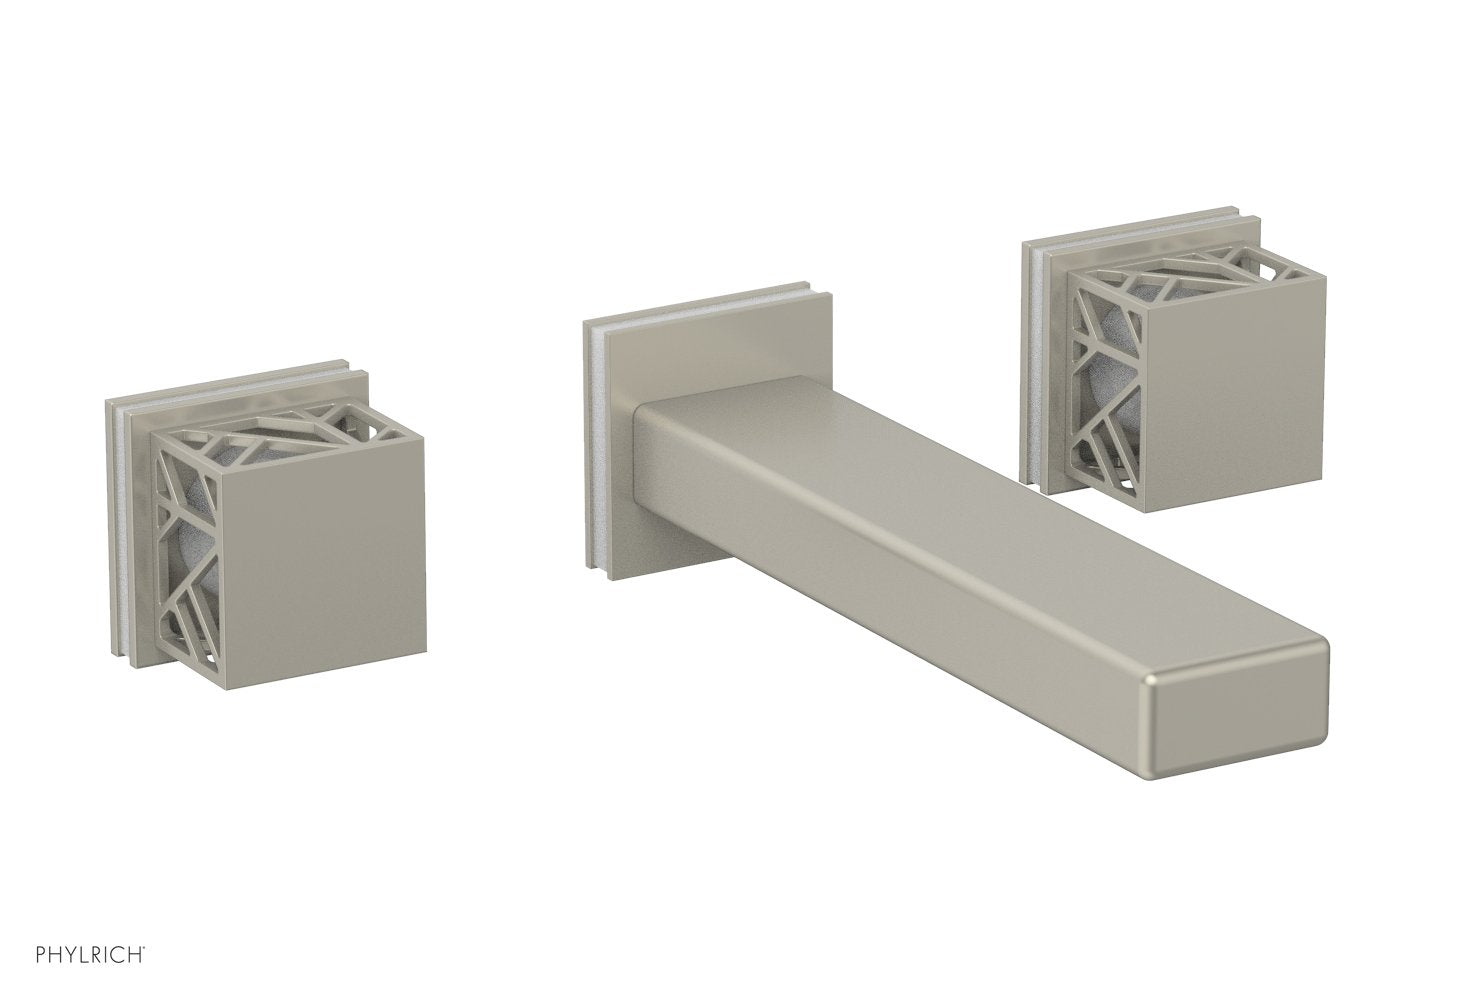 Phylrich JOLIE Wall Lavatory Set - Square Handles with "White" Accents